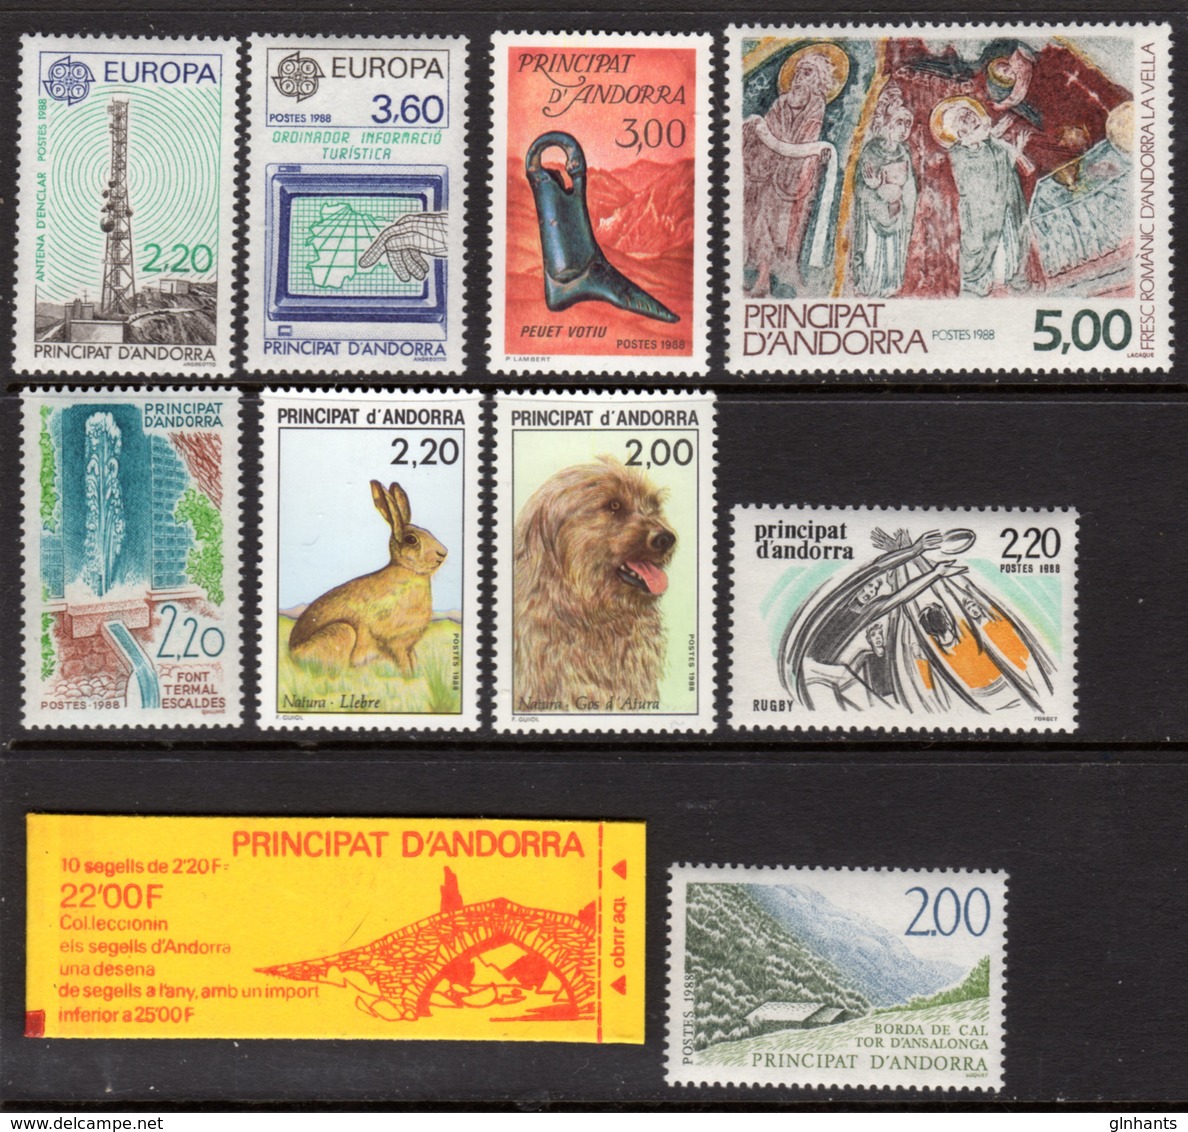 FRENCH ANDORRA - 1988 COMPLETE YEAR SET INCLUDING BOOKLET FINE MNH ** SG F389 - F397, SB2 - Collections